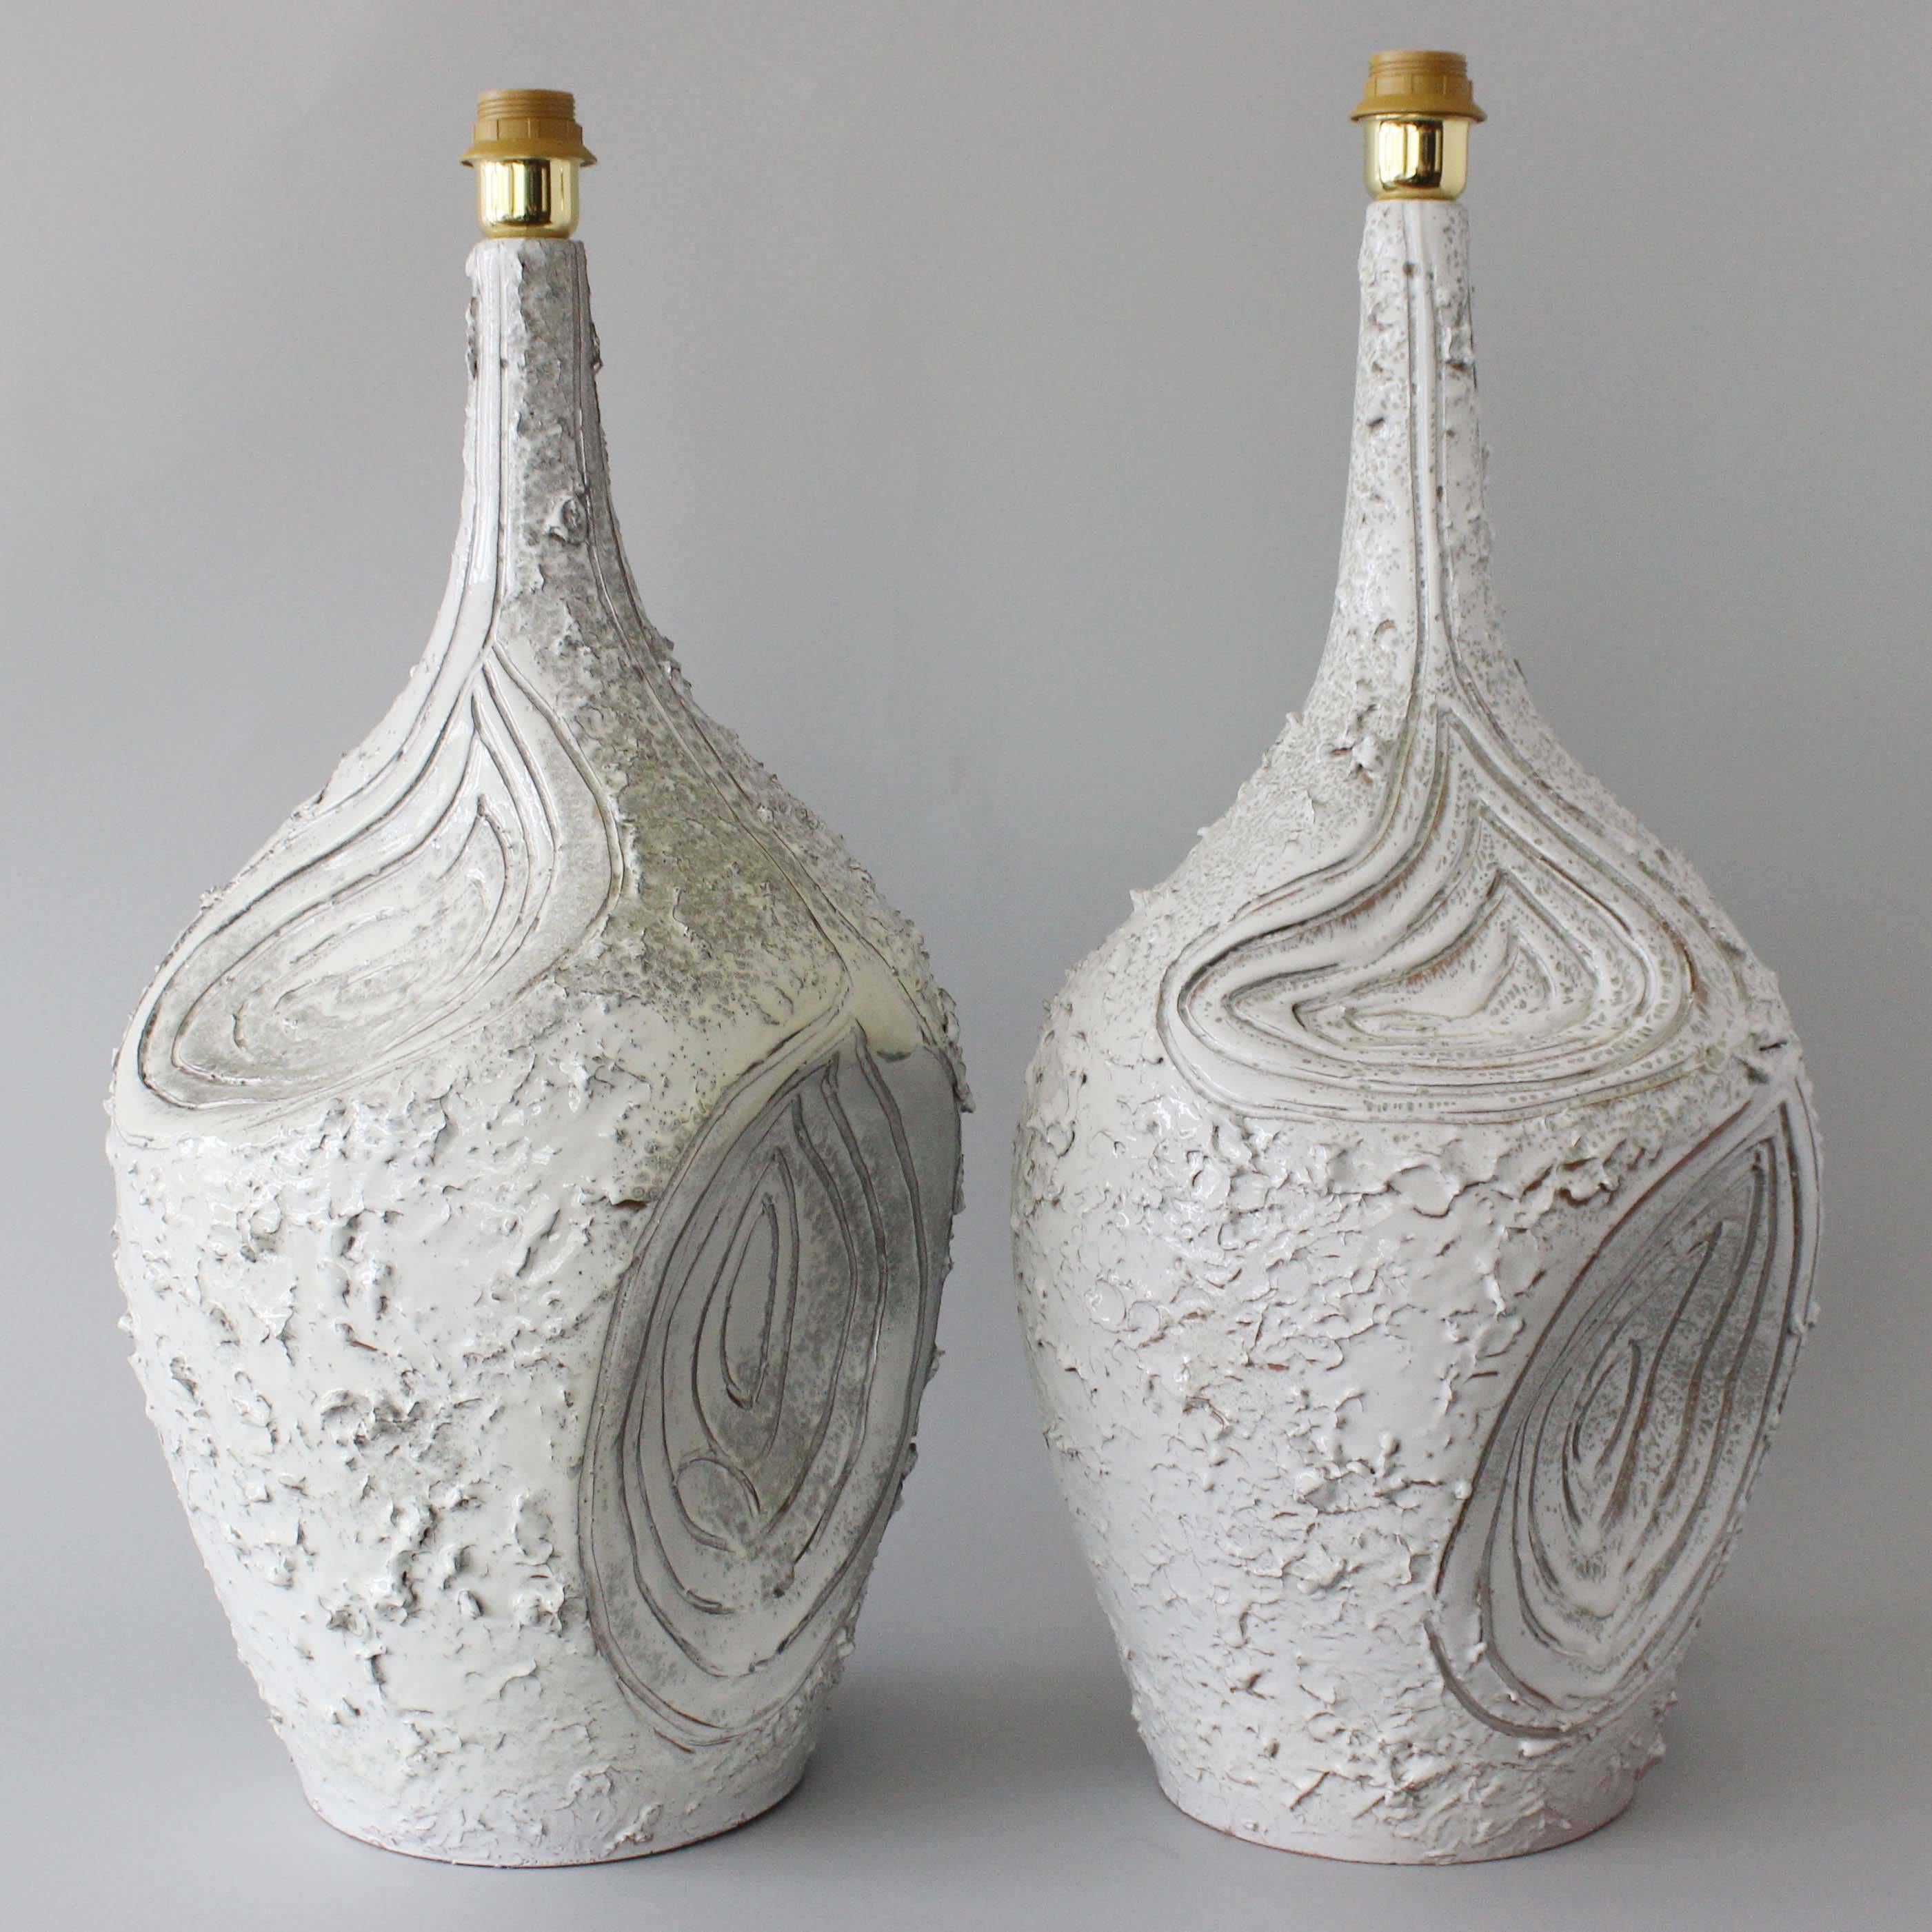 A large pair of textured, and glazed terra cotta lamps with incised concentric patterning, in the style of Guido Gambone.

   